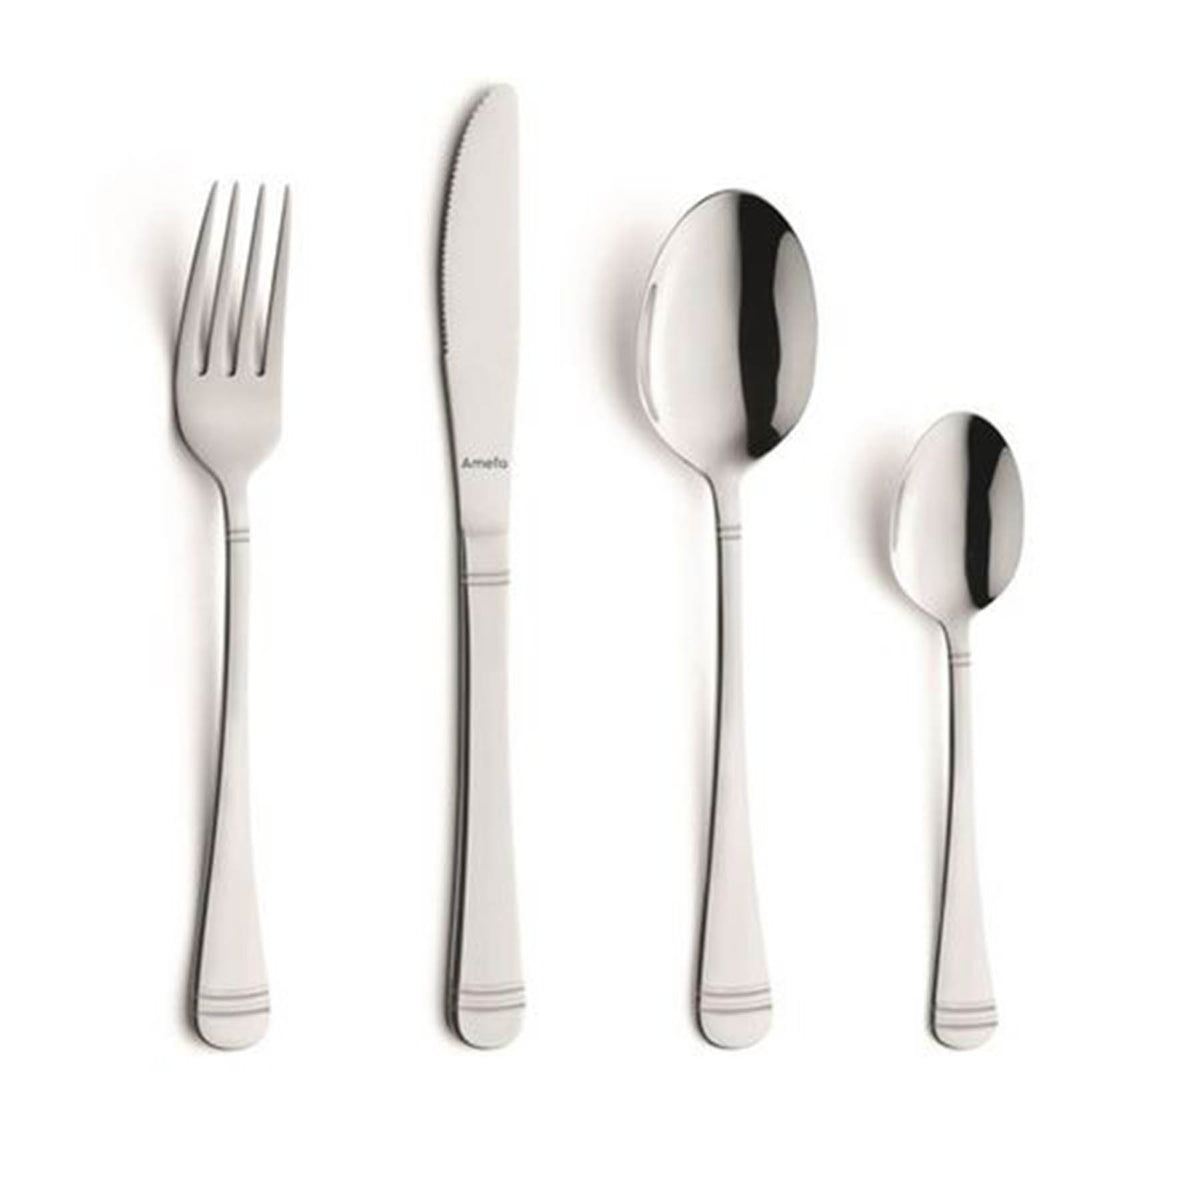 Napoli 24 Pcs Cutlery Set , Silver ColorCutlery set consists of 24 pieces